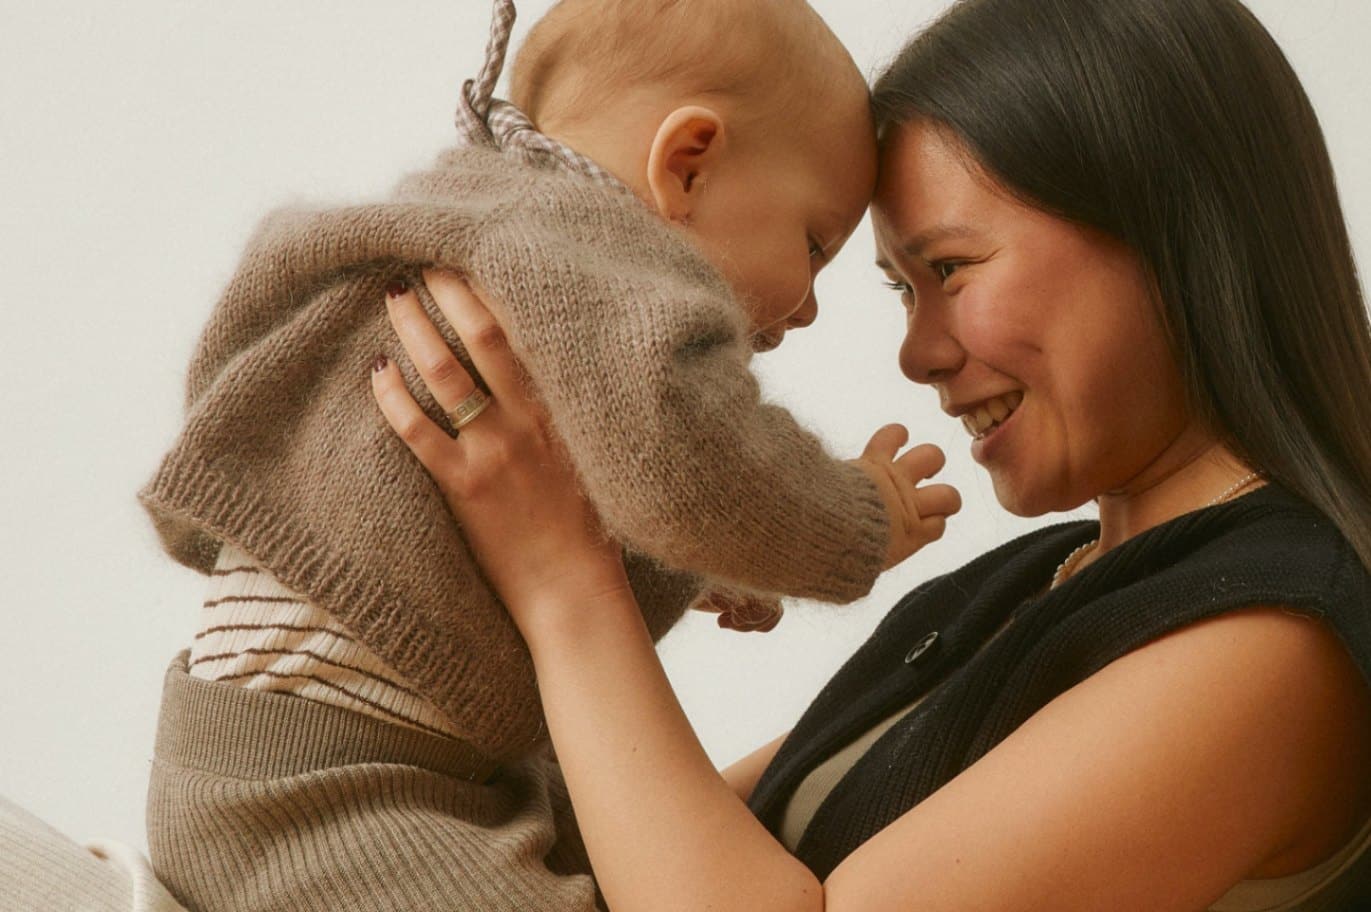 14 Fun Facts About the Science of Motherhood